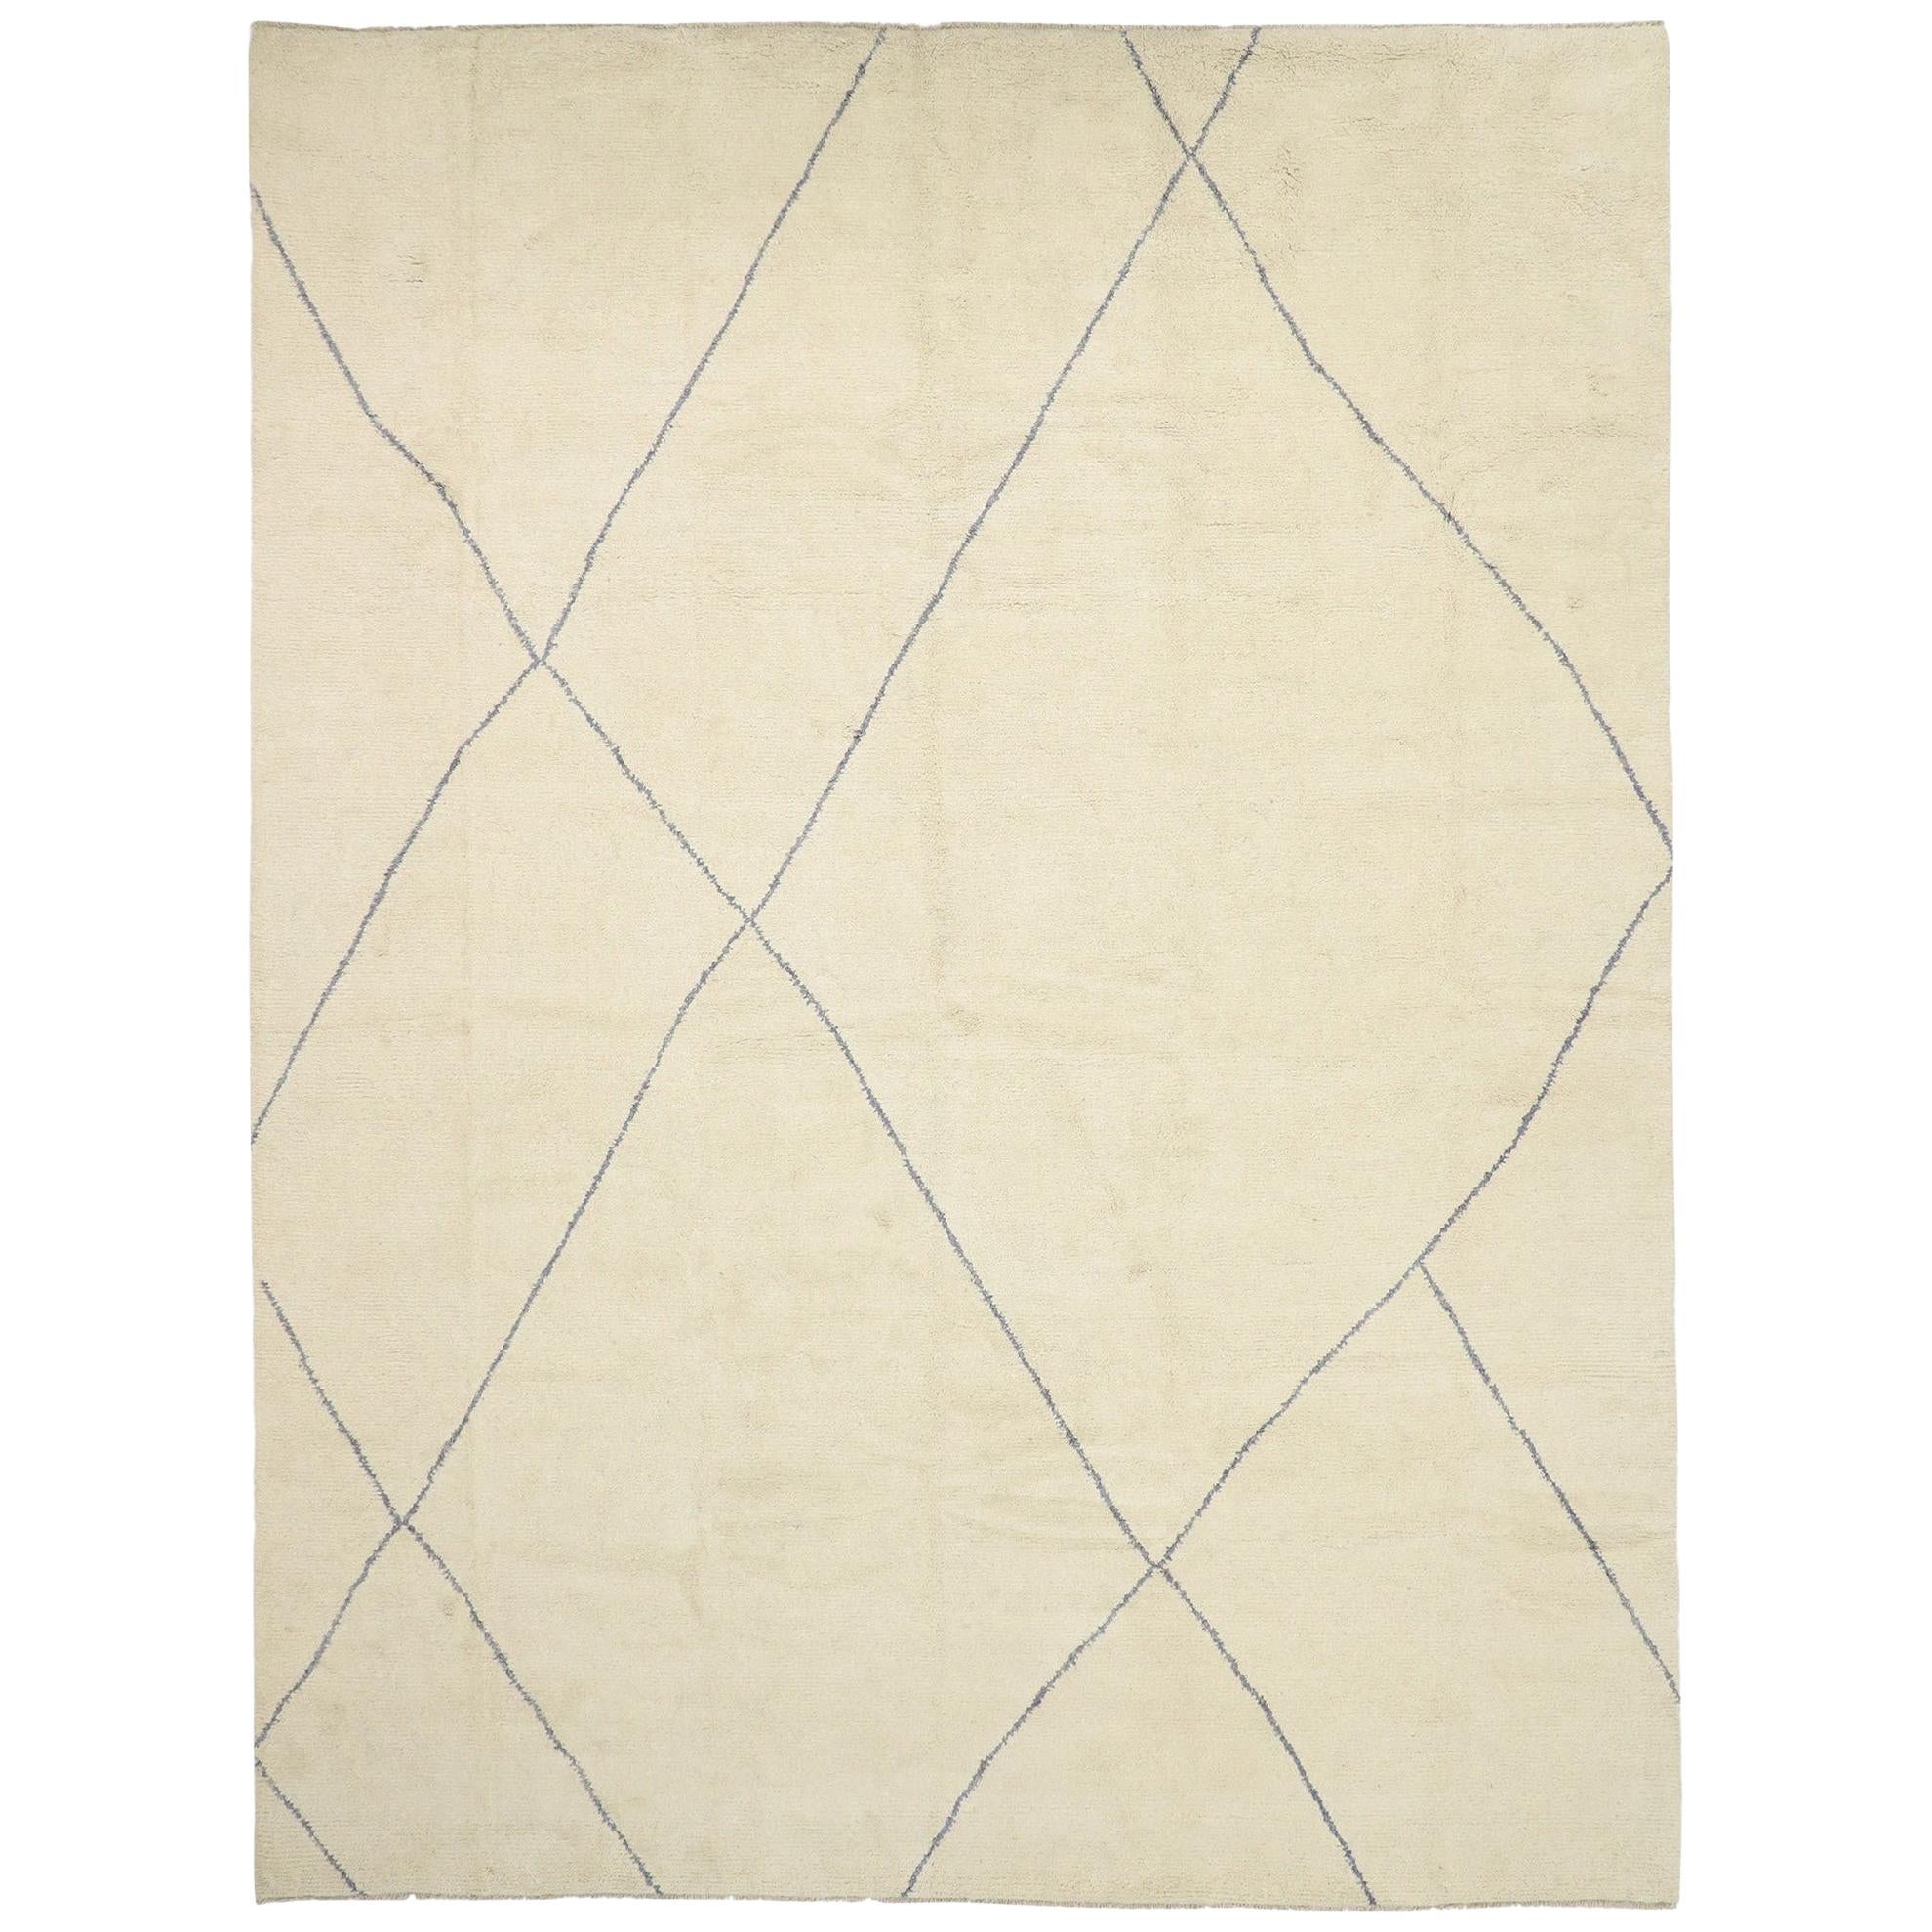 Contemporary Large Moroccan Rug with Modernist Style and Cozy Minimalist Vibes